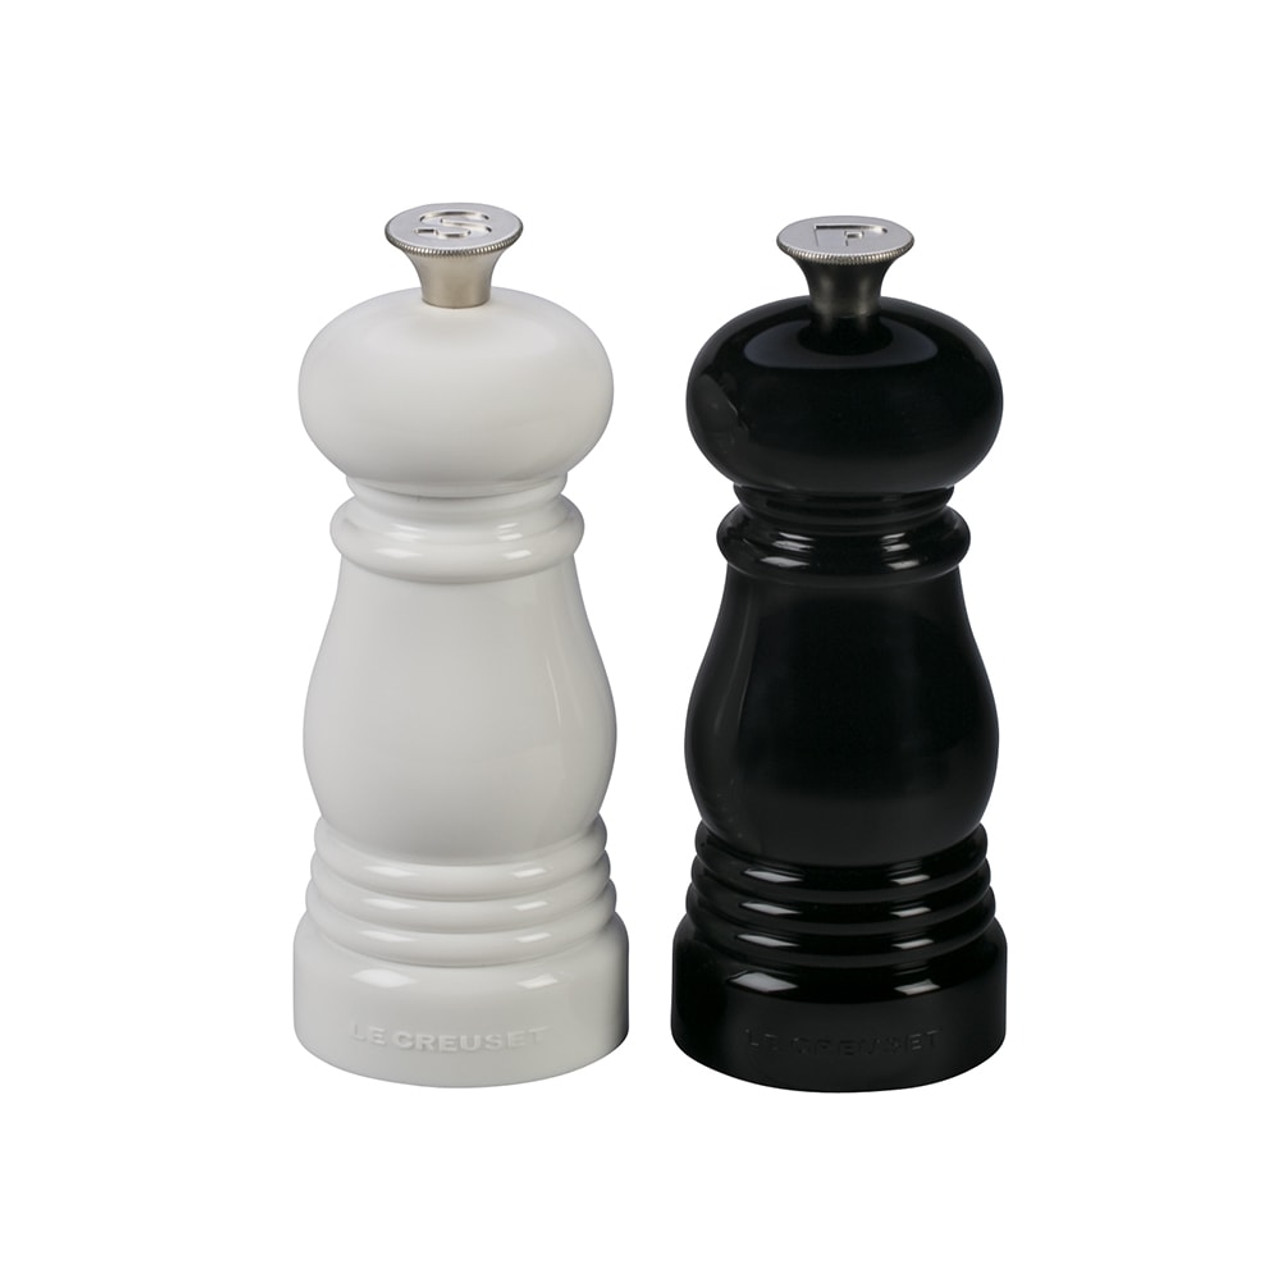 ZWILLING Enfinigy Electric Salt/Pepper Mill - White 